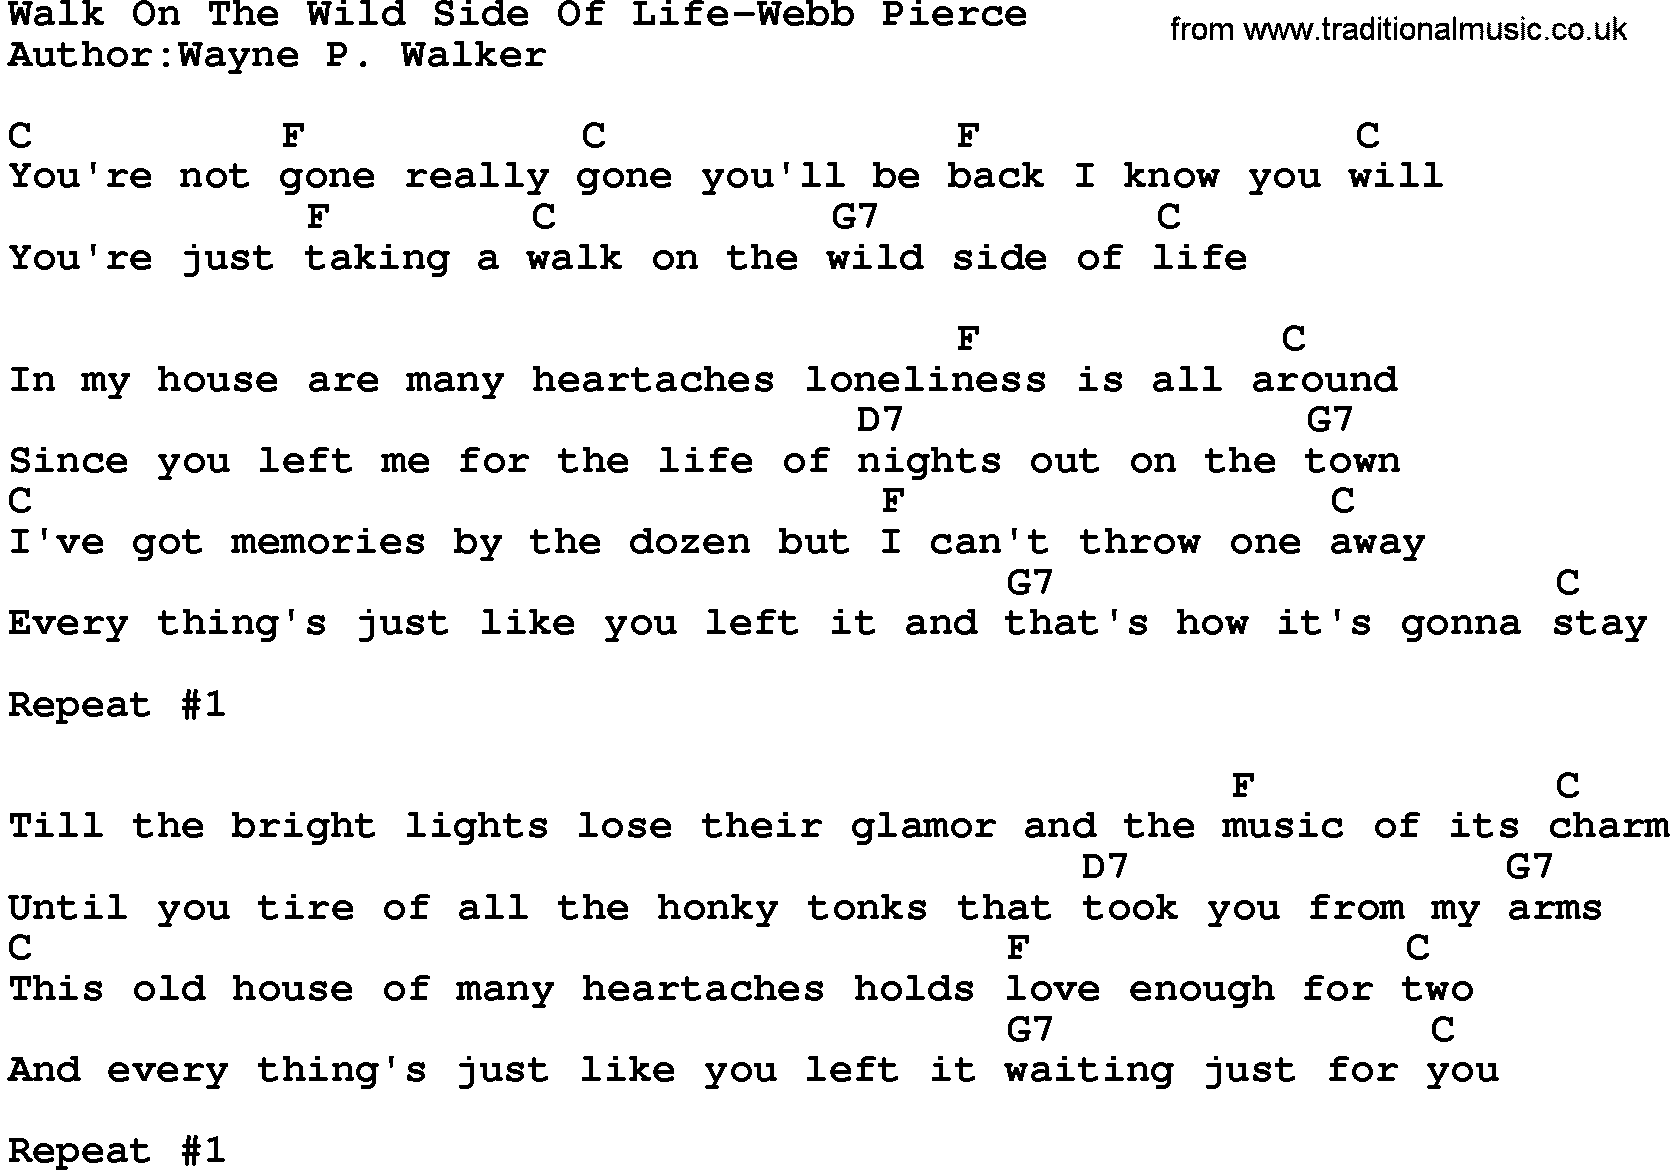 Country music song: Walk On The Wild Side Of Life-Webb Pierce lyrics and chords